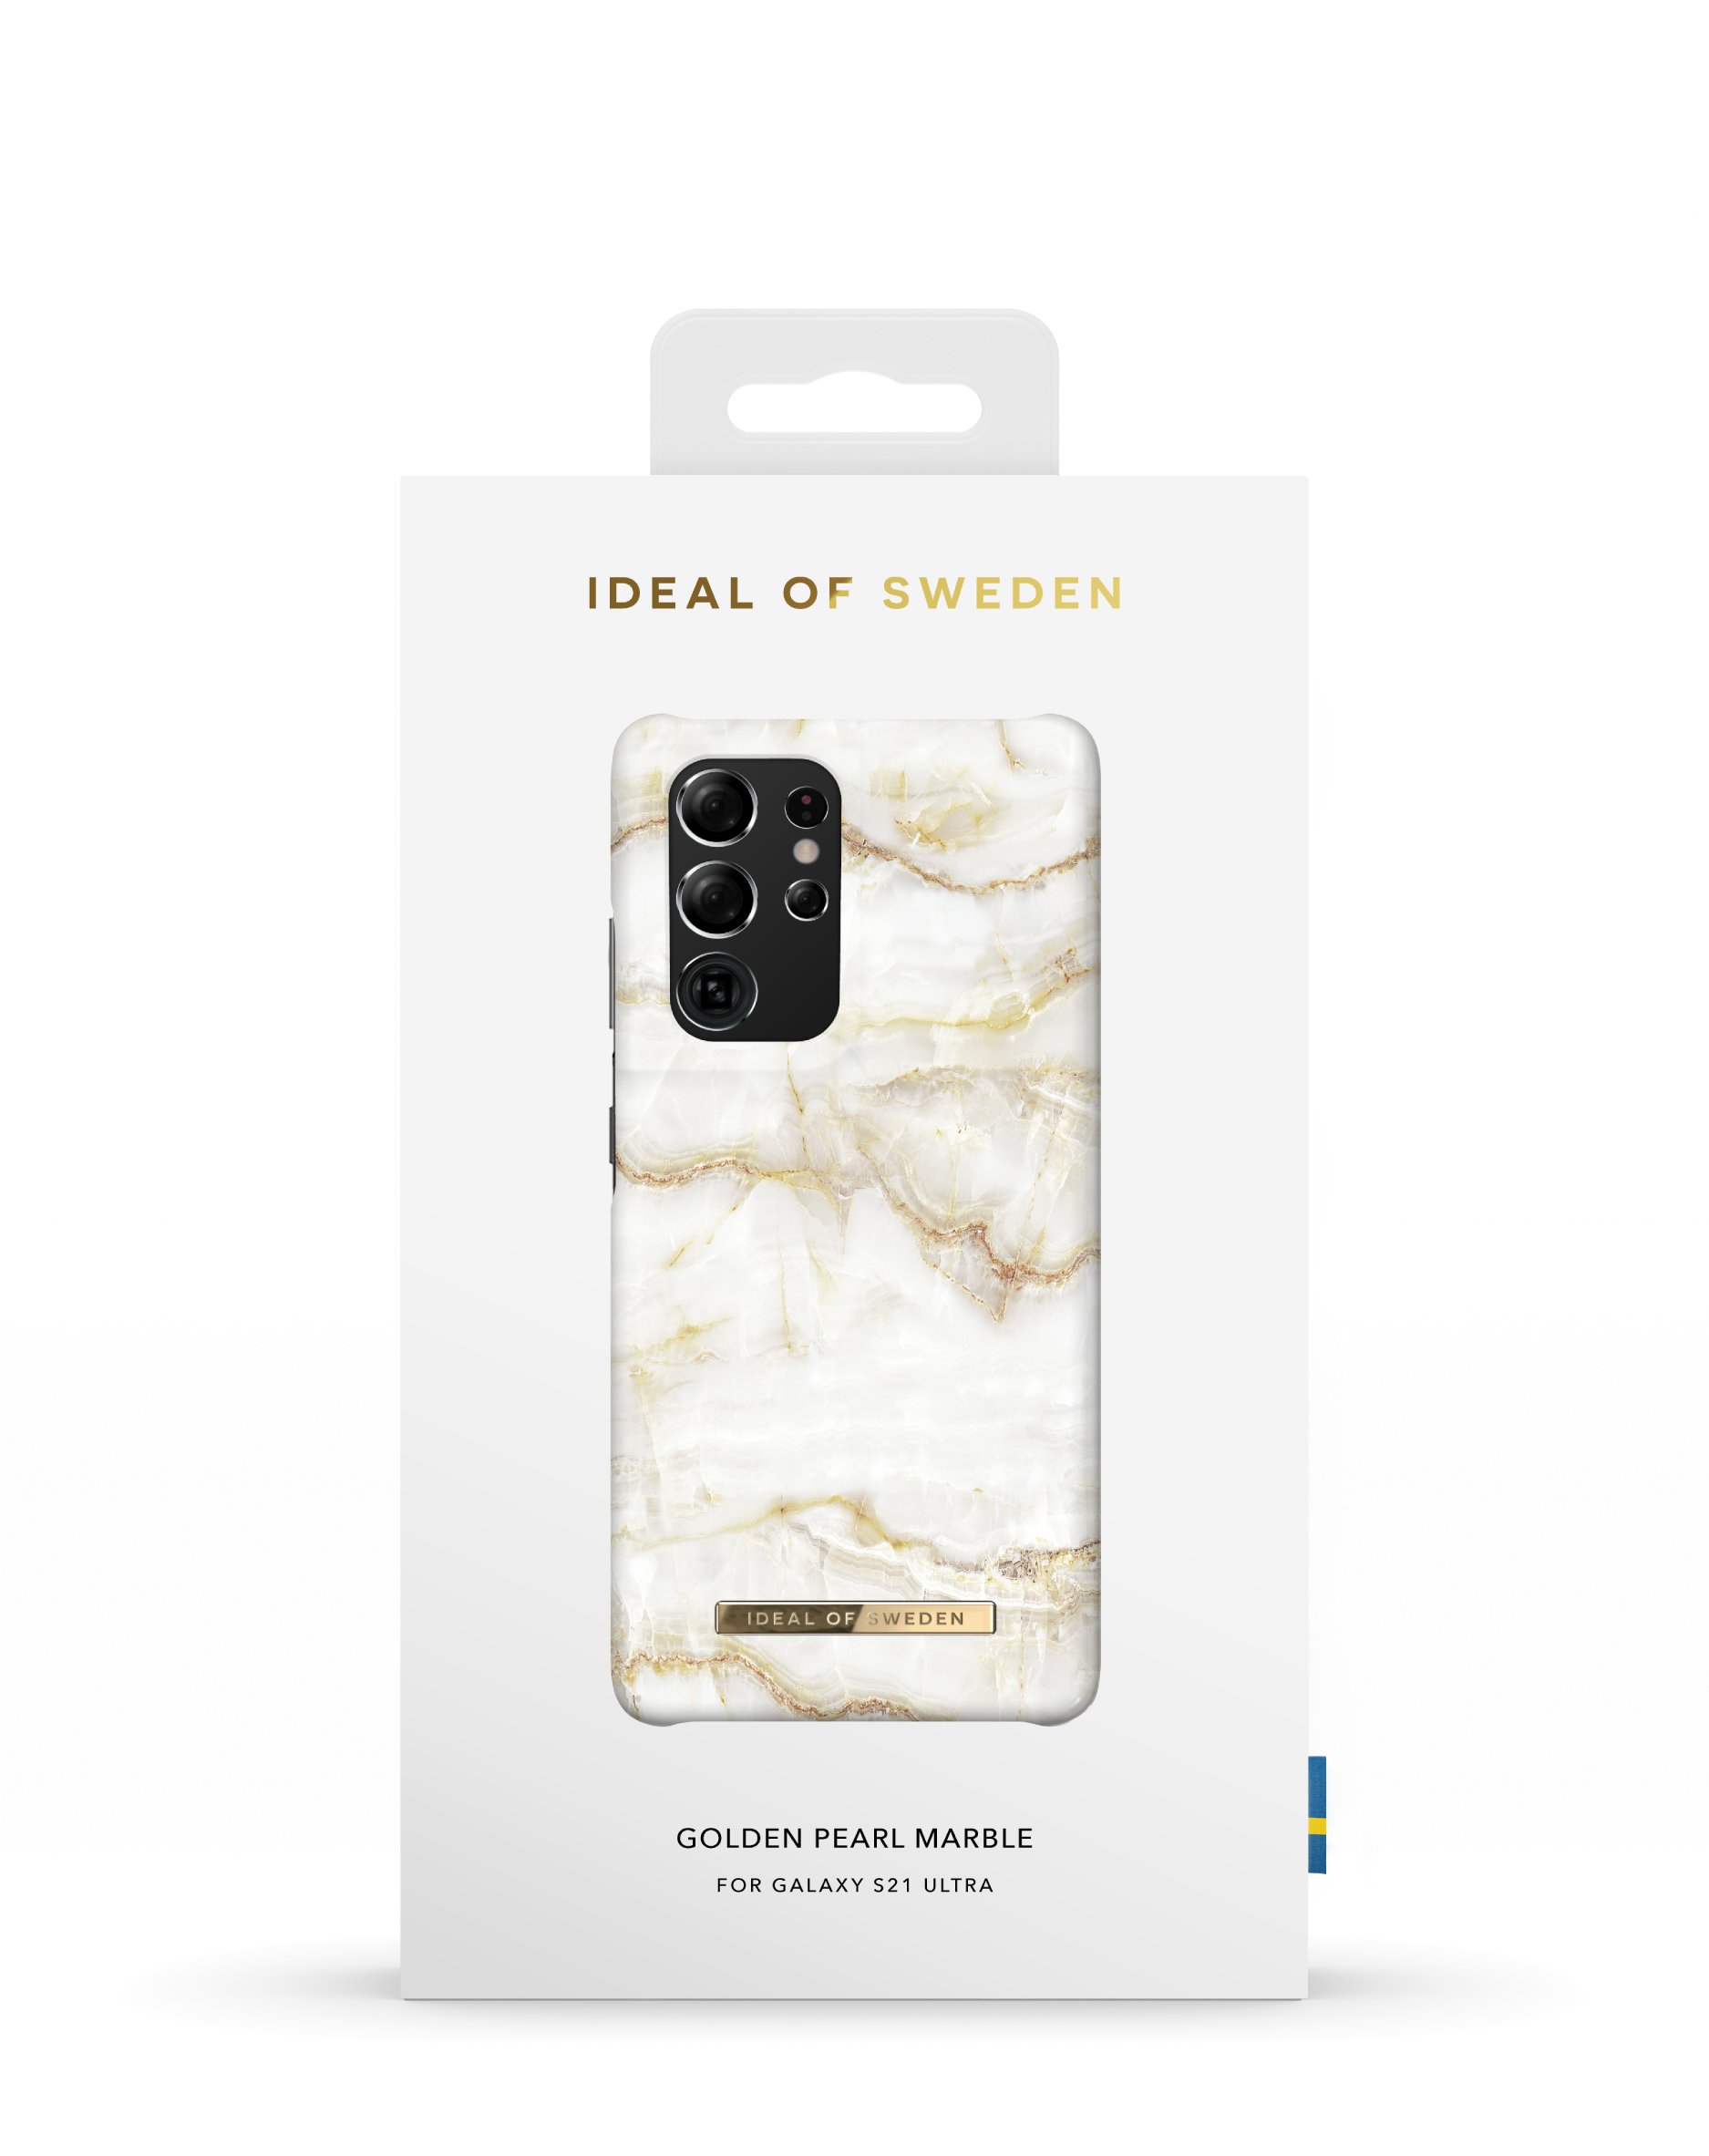 SWEDEN IDFCSS20-S21U-194, Pearl IDEAL Golden Backcover, OF Marble Galaxy Samsung, S21 Ultra,